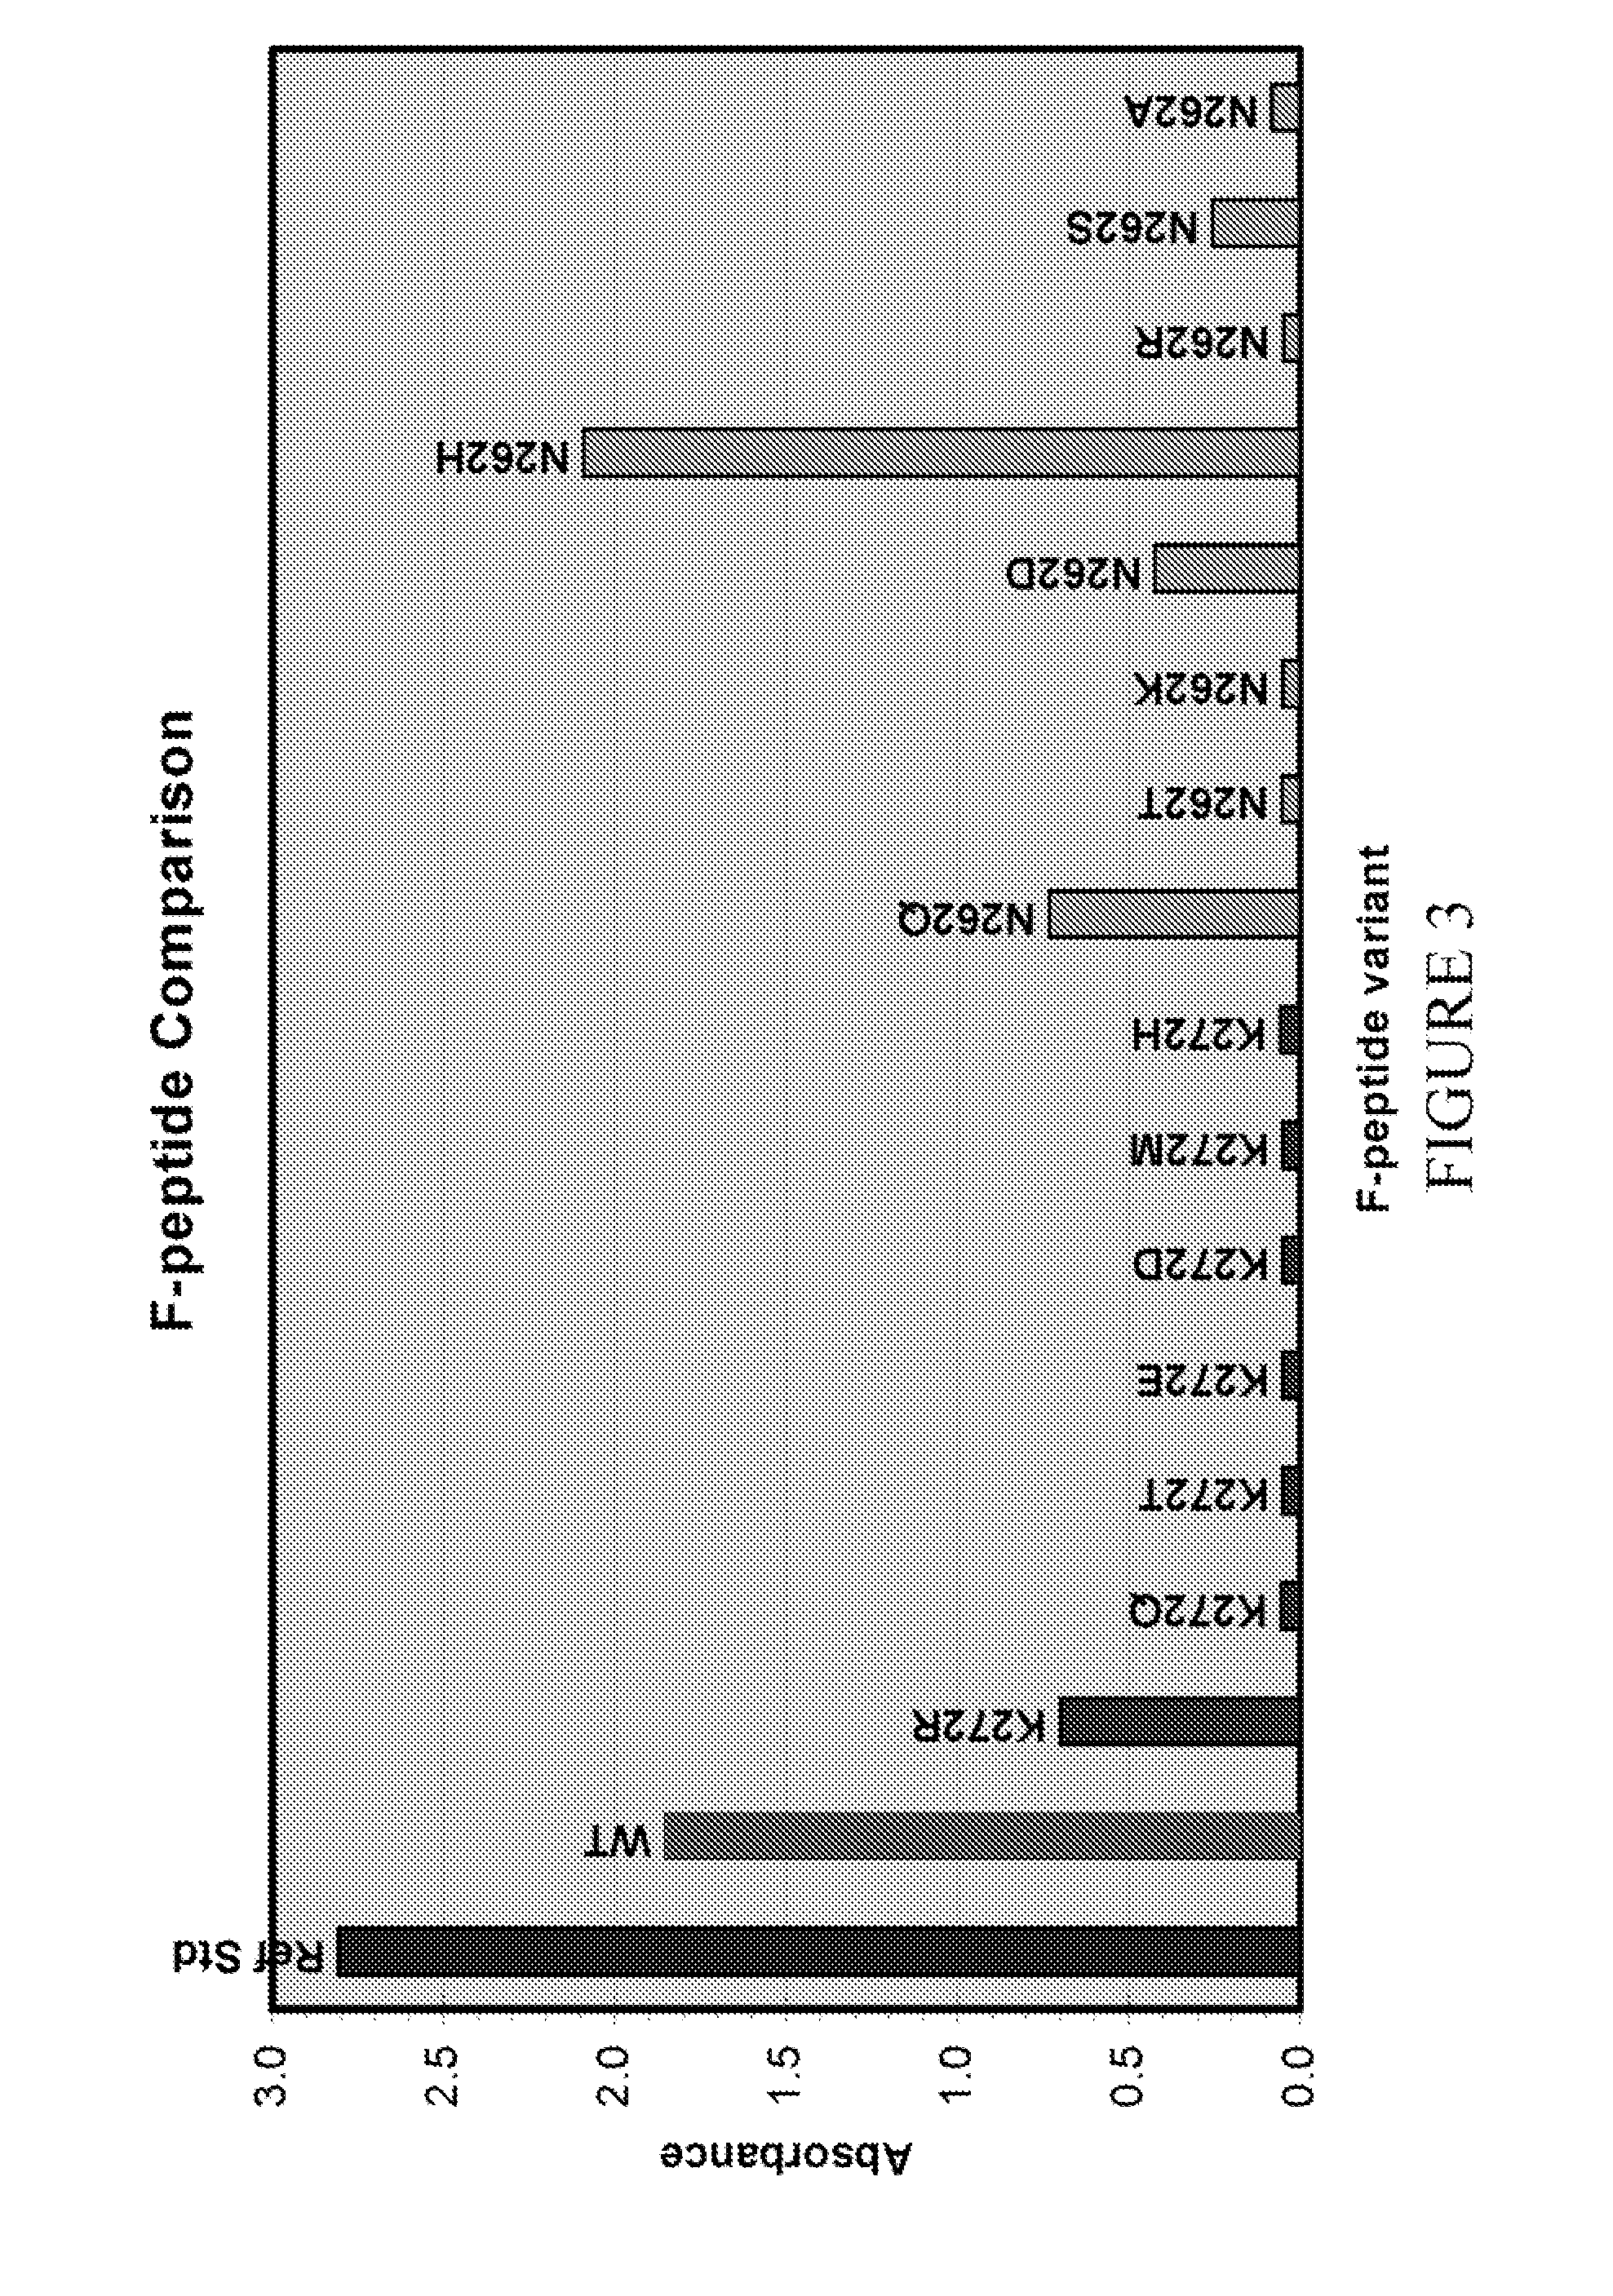 Antibodies Against And Methods For Producing Vaccines For Respiratory Syncytial Virus